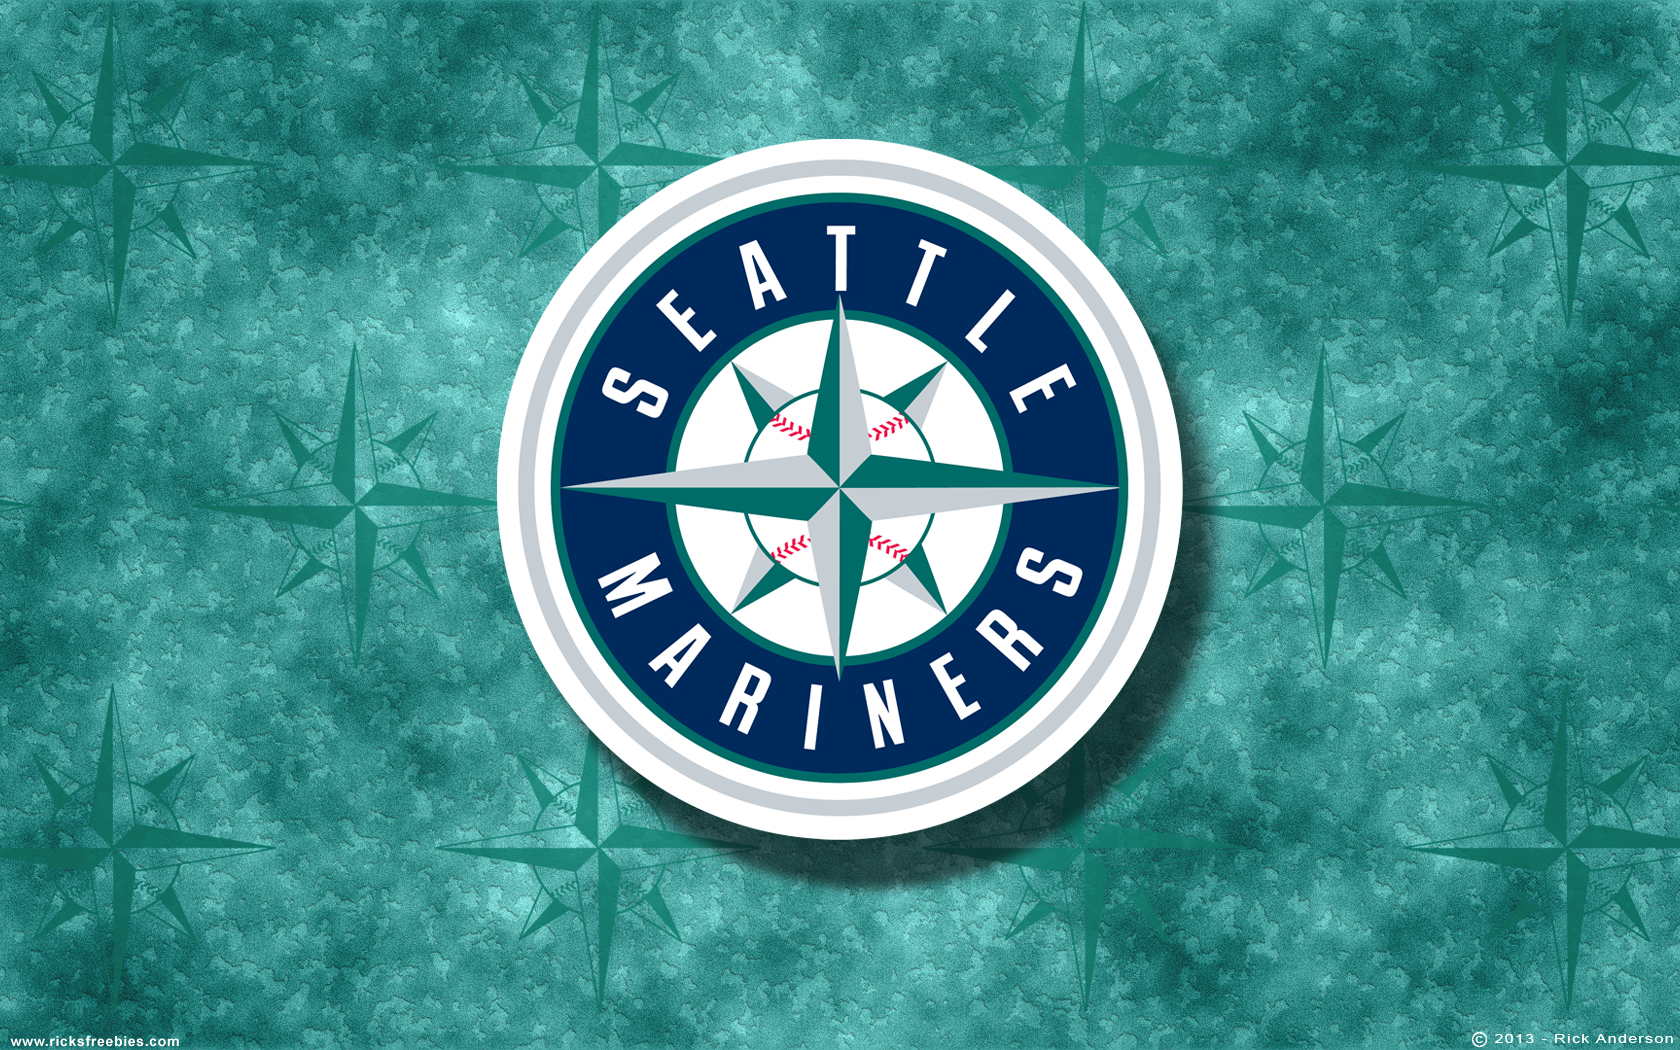 Mariners postpone tonight's game due to unhealthy air quality | News |  nbcrightnow.com